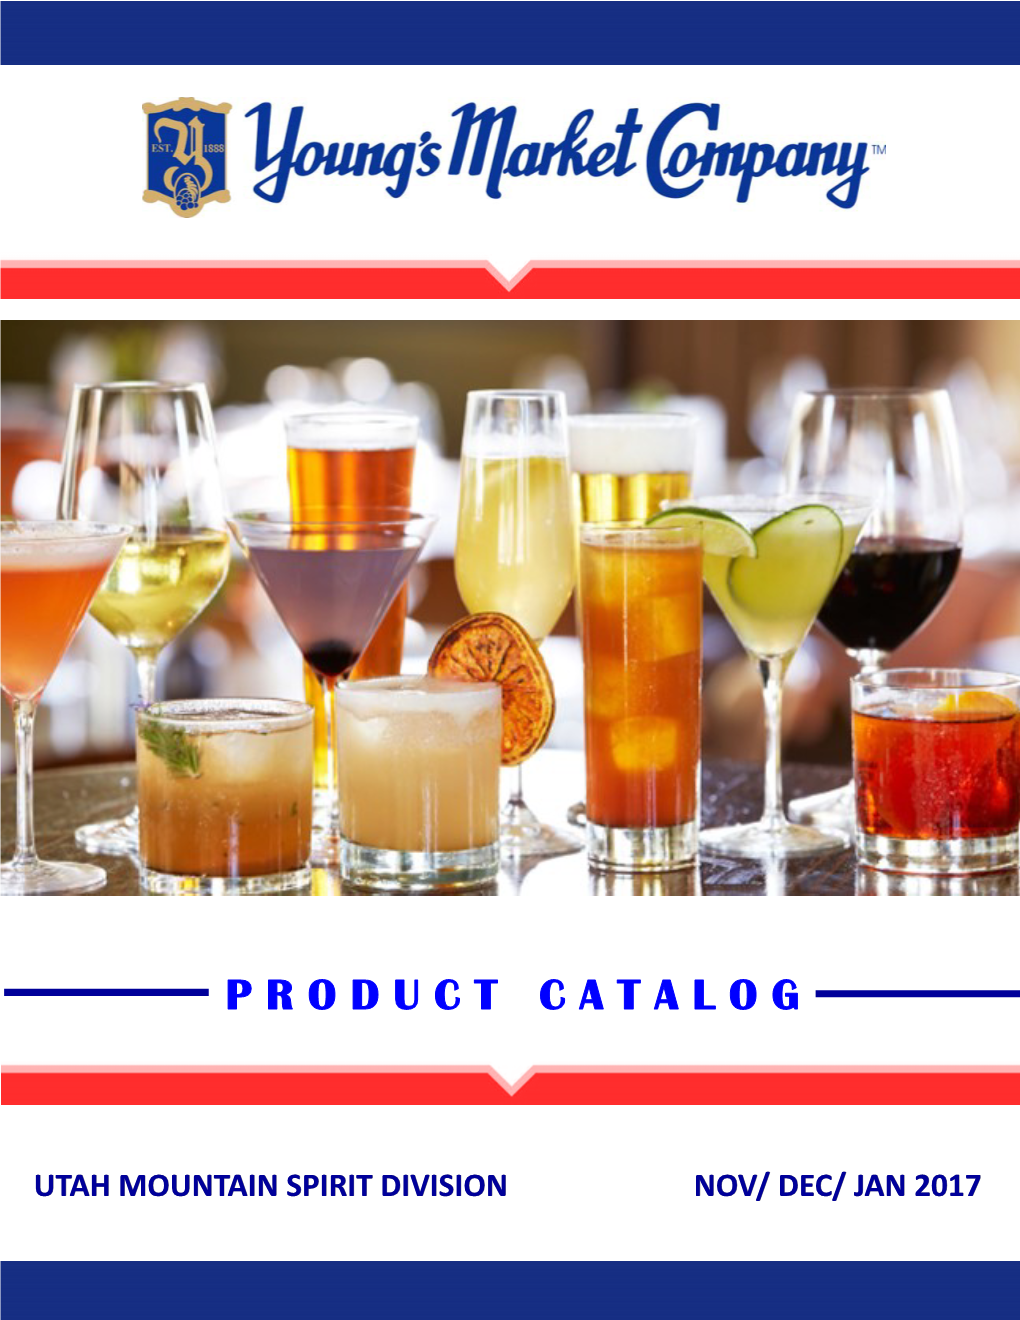 Young's Market Company Strives to Be the Leader in the Wholesale and Distribution of Wine, Spirits and Selected Beverages